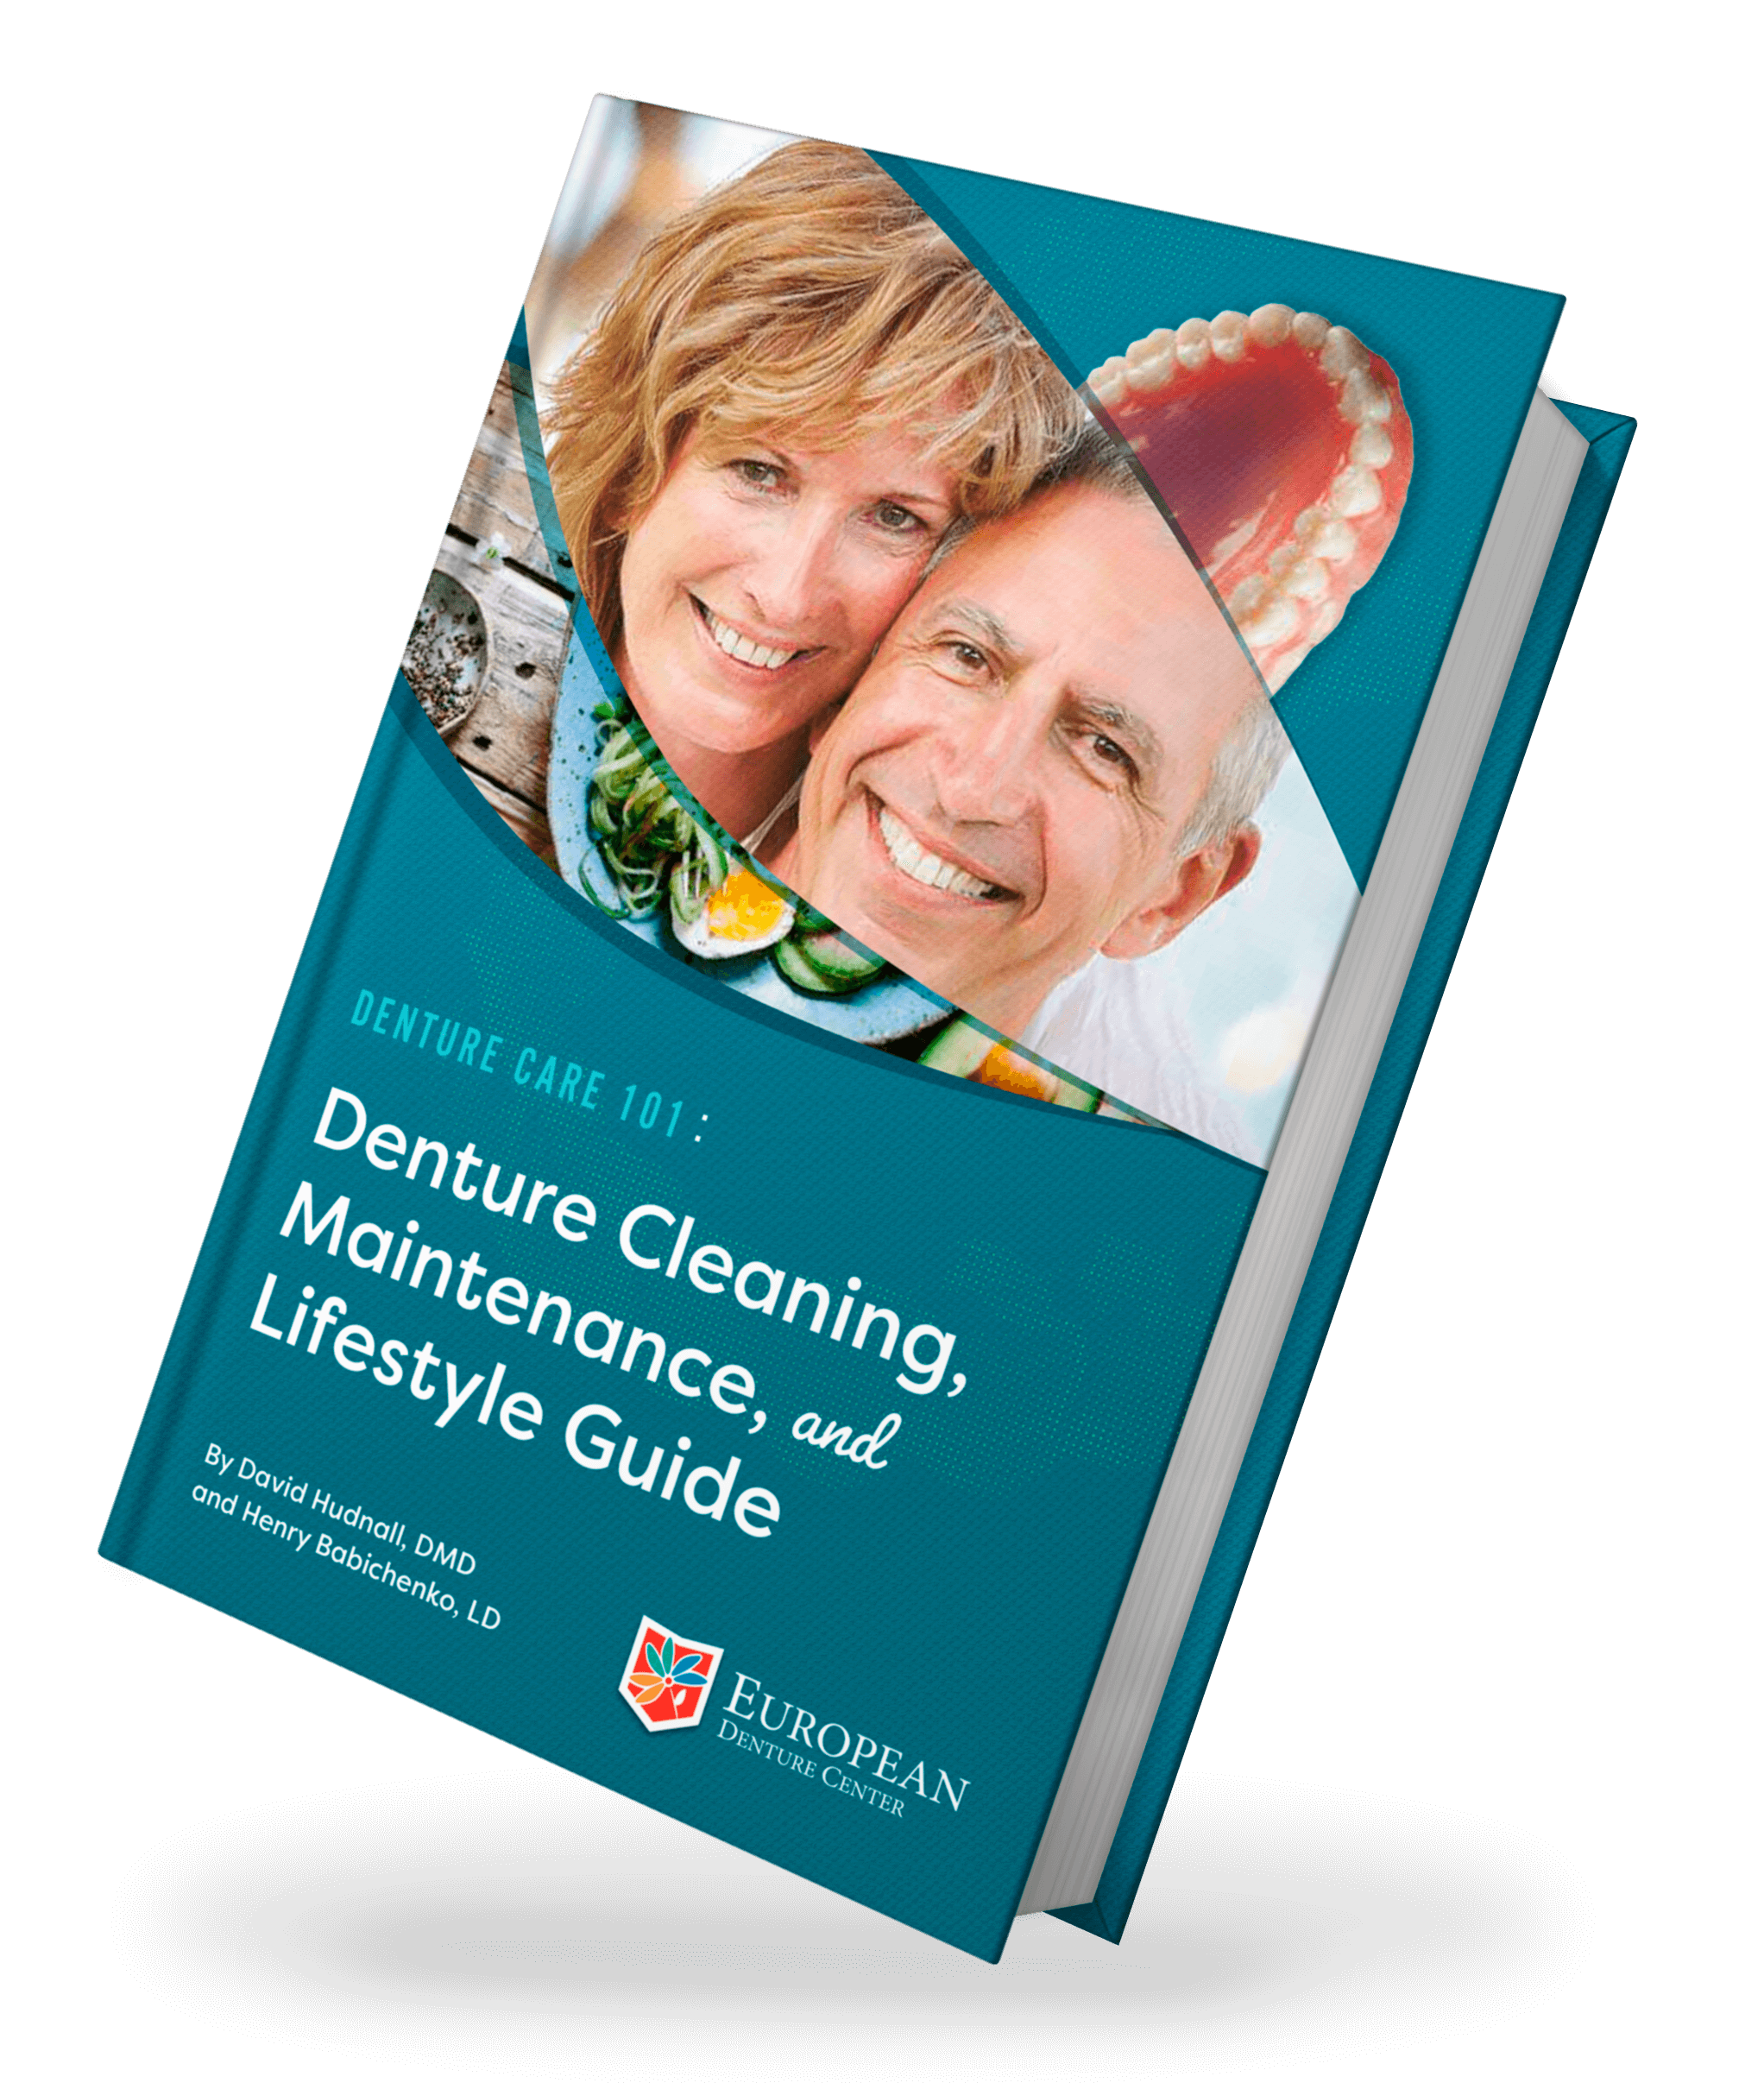 Denture Cleaning, Maintenance, and Lifestyle Guide ebook